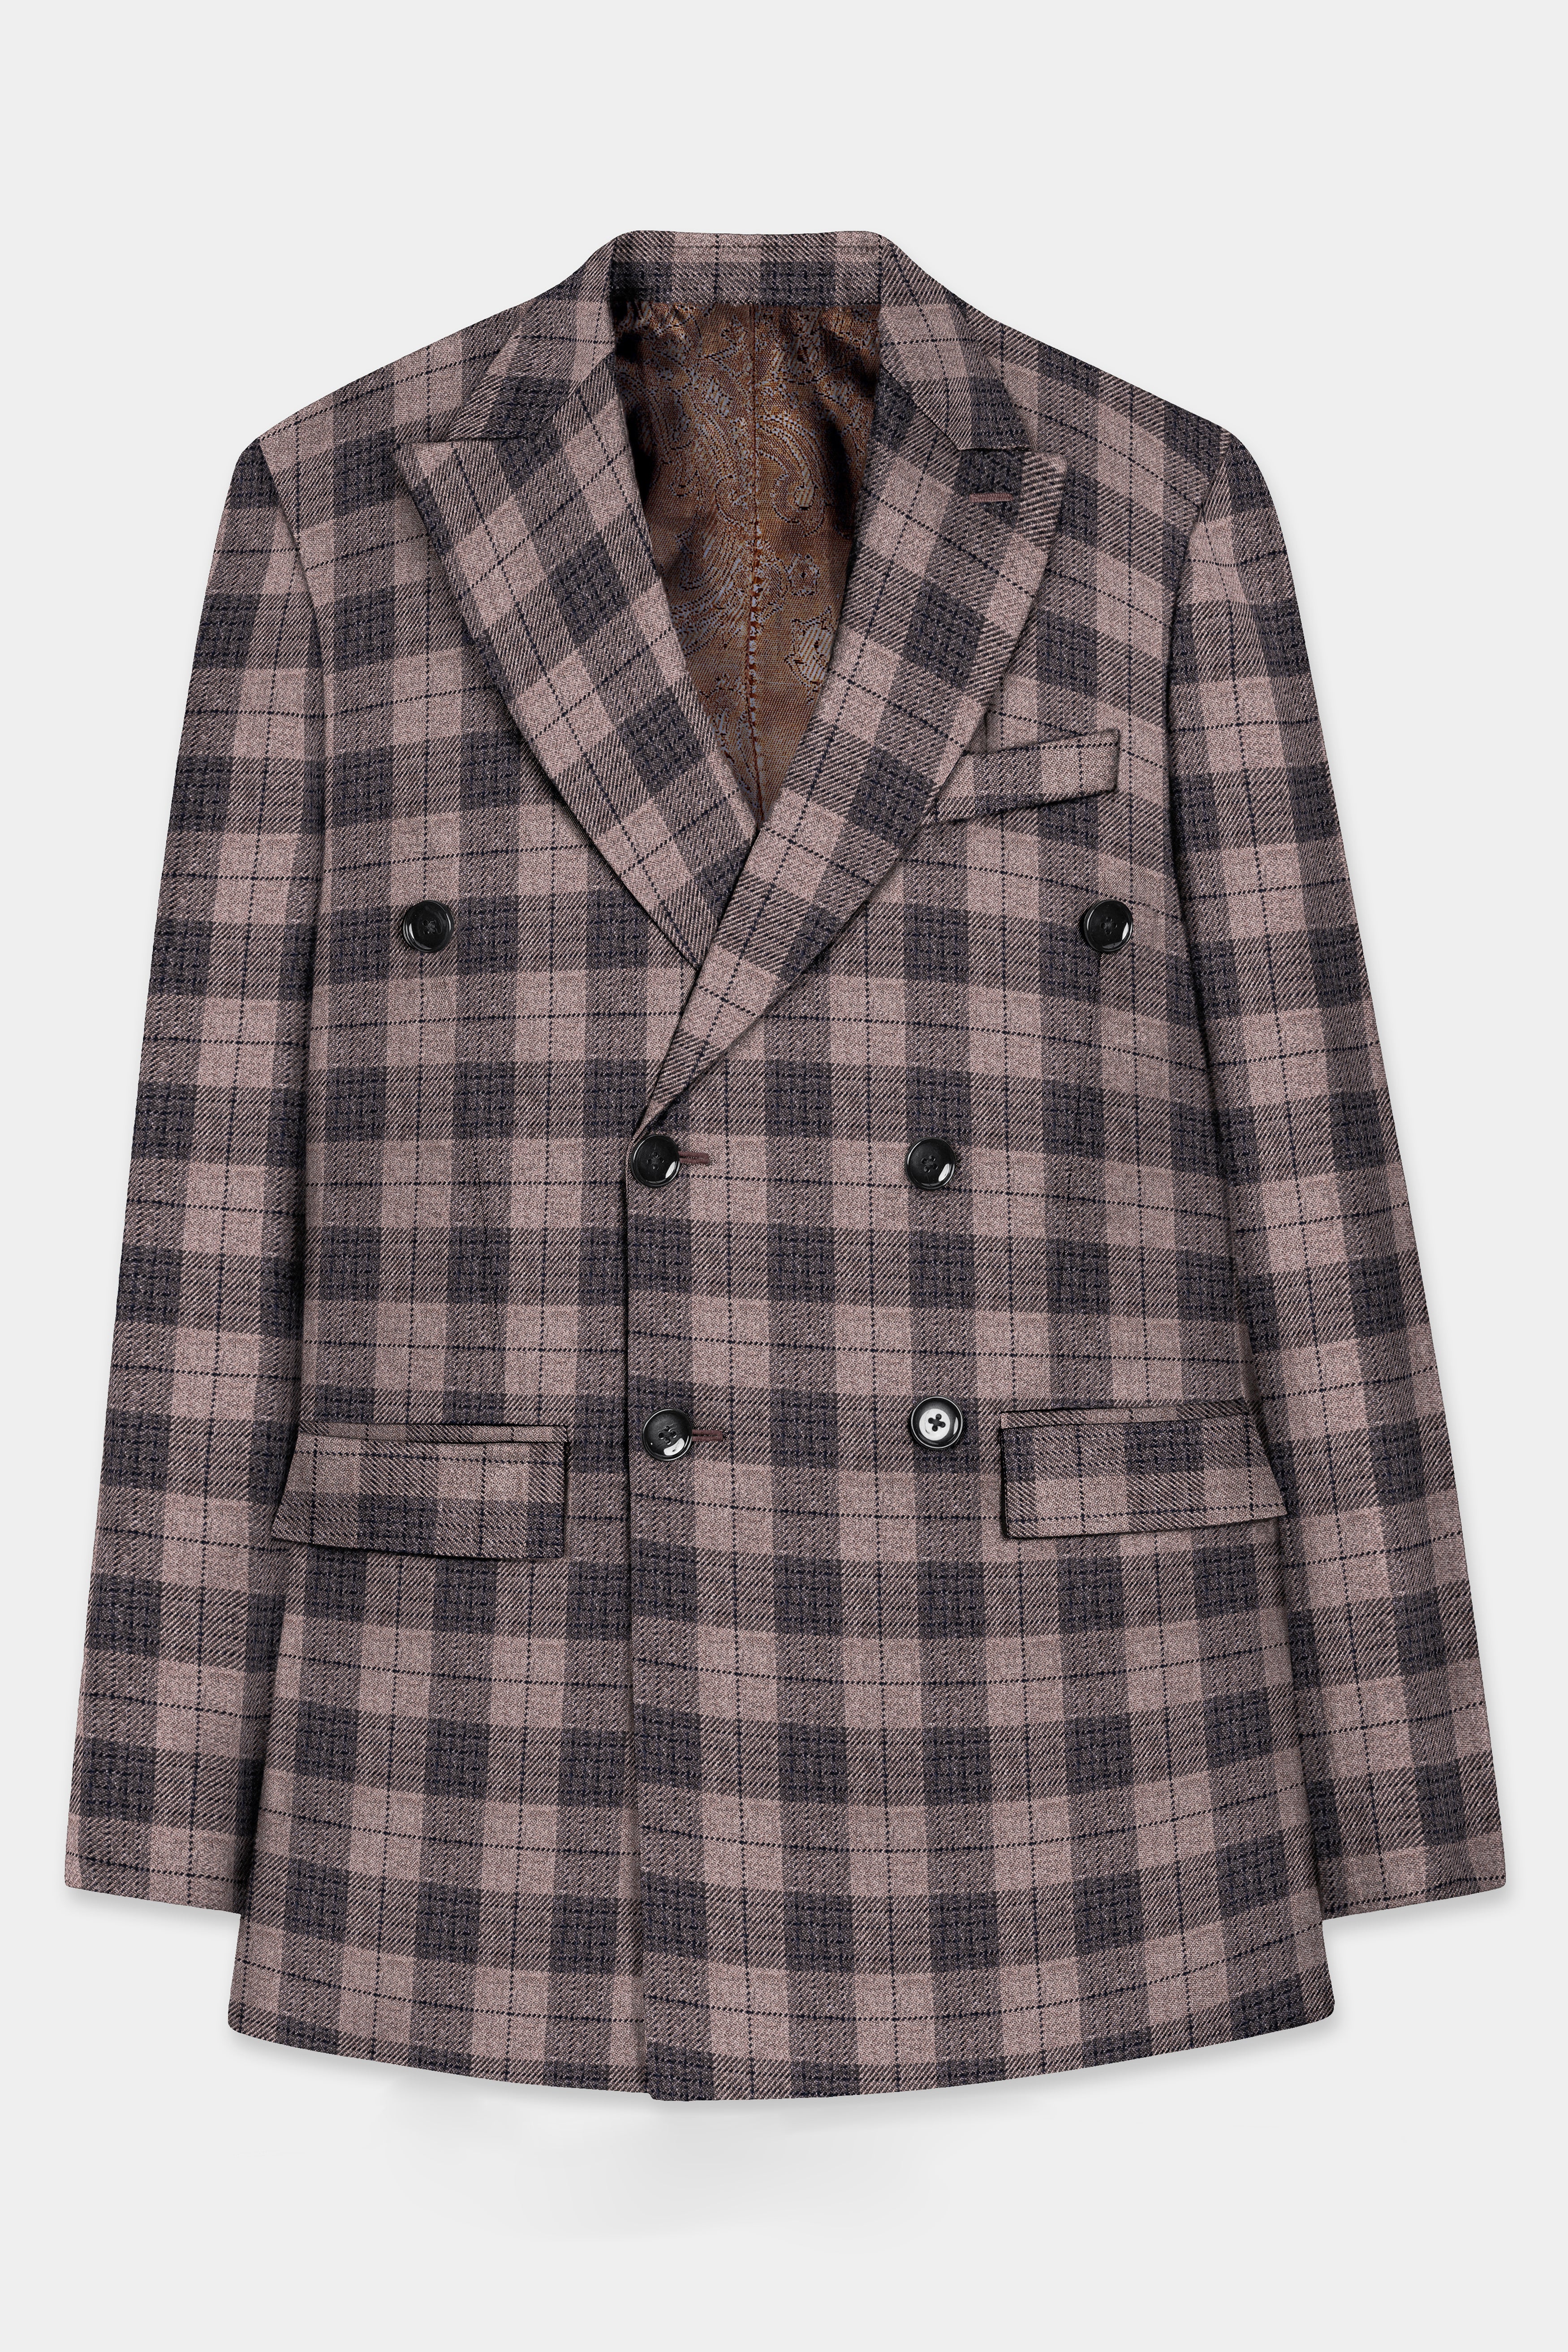 Vampire Brown Checks Plaid Tweed Double Breasted Suit